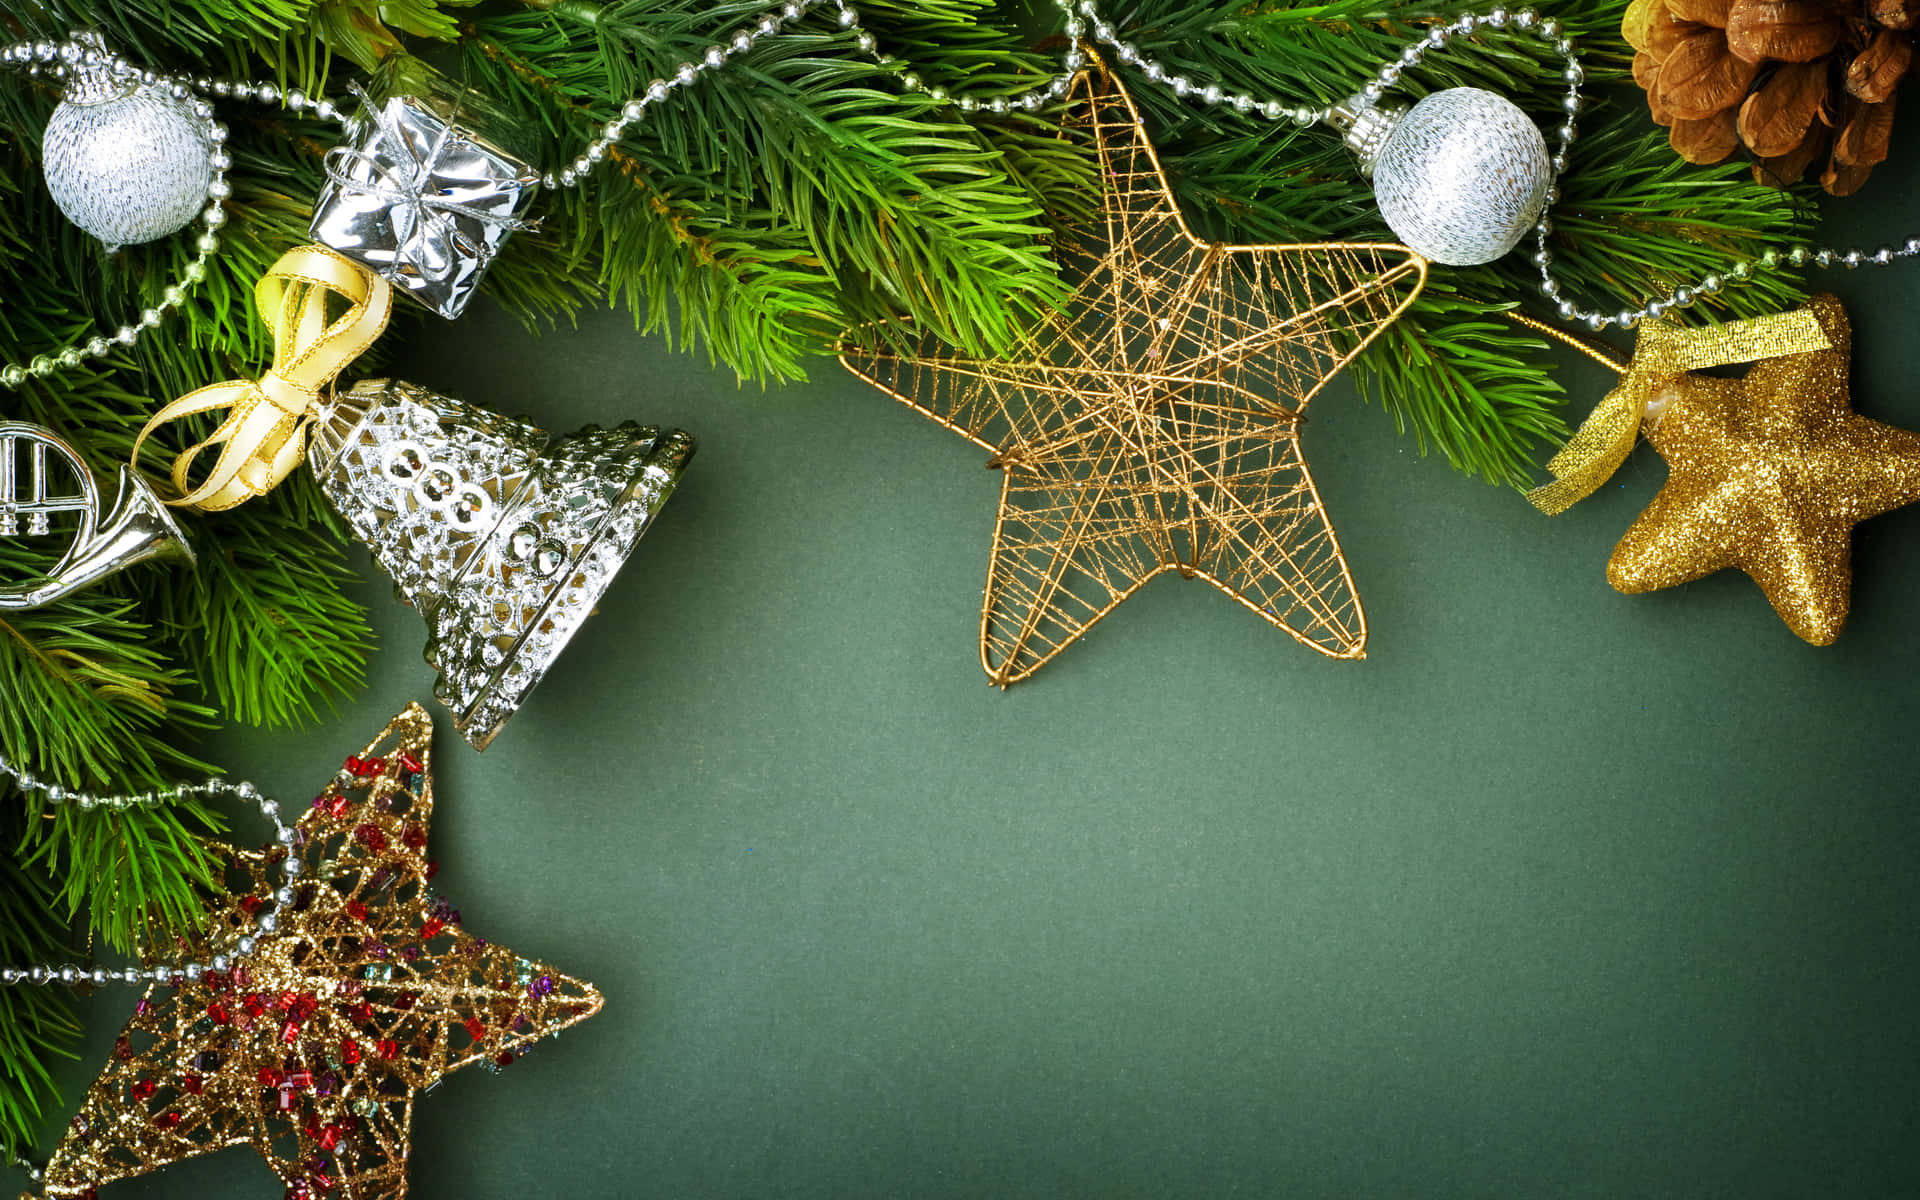 ‘Celebrate a Green Christmas with Nature-Inspired Holiday Decorations’